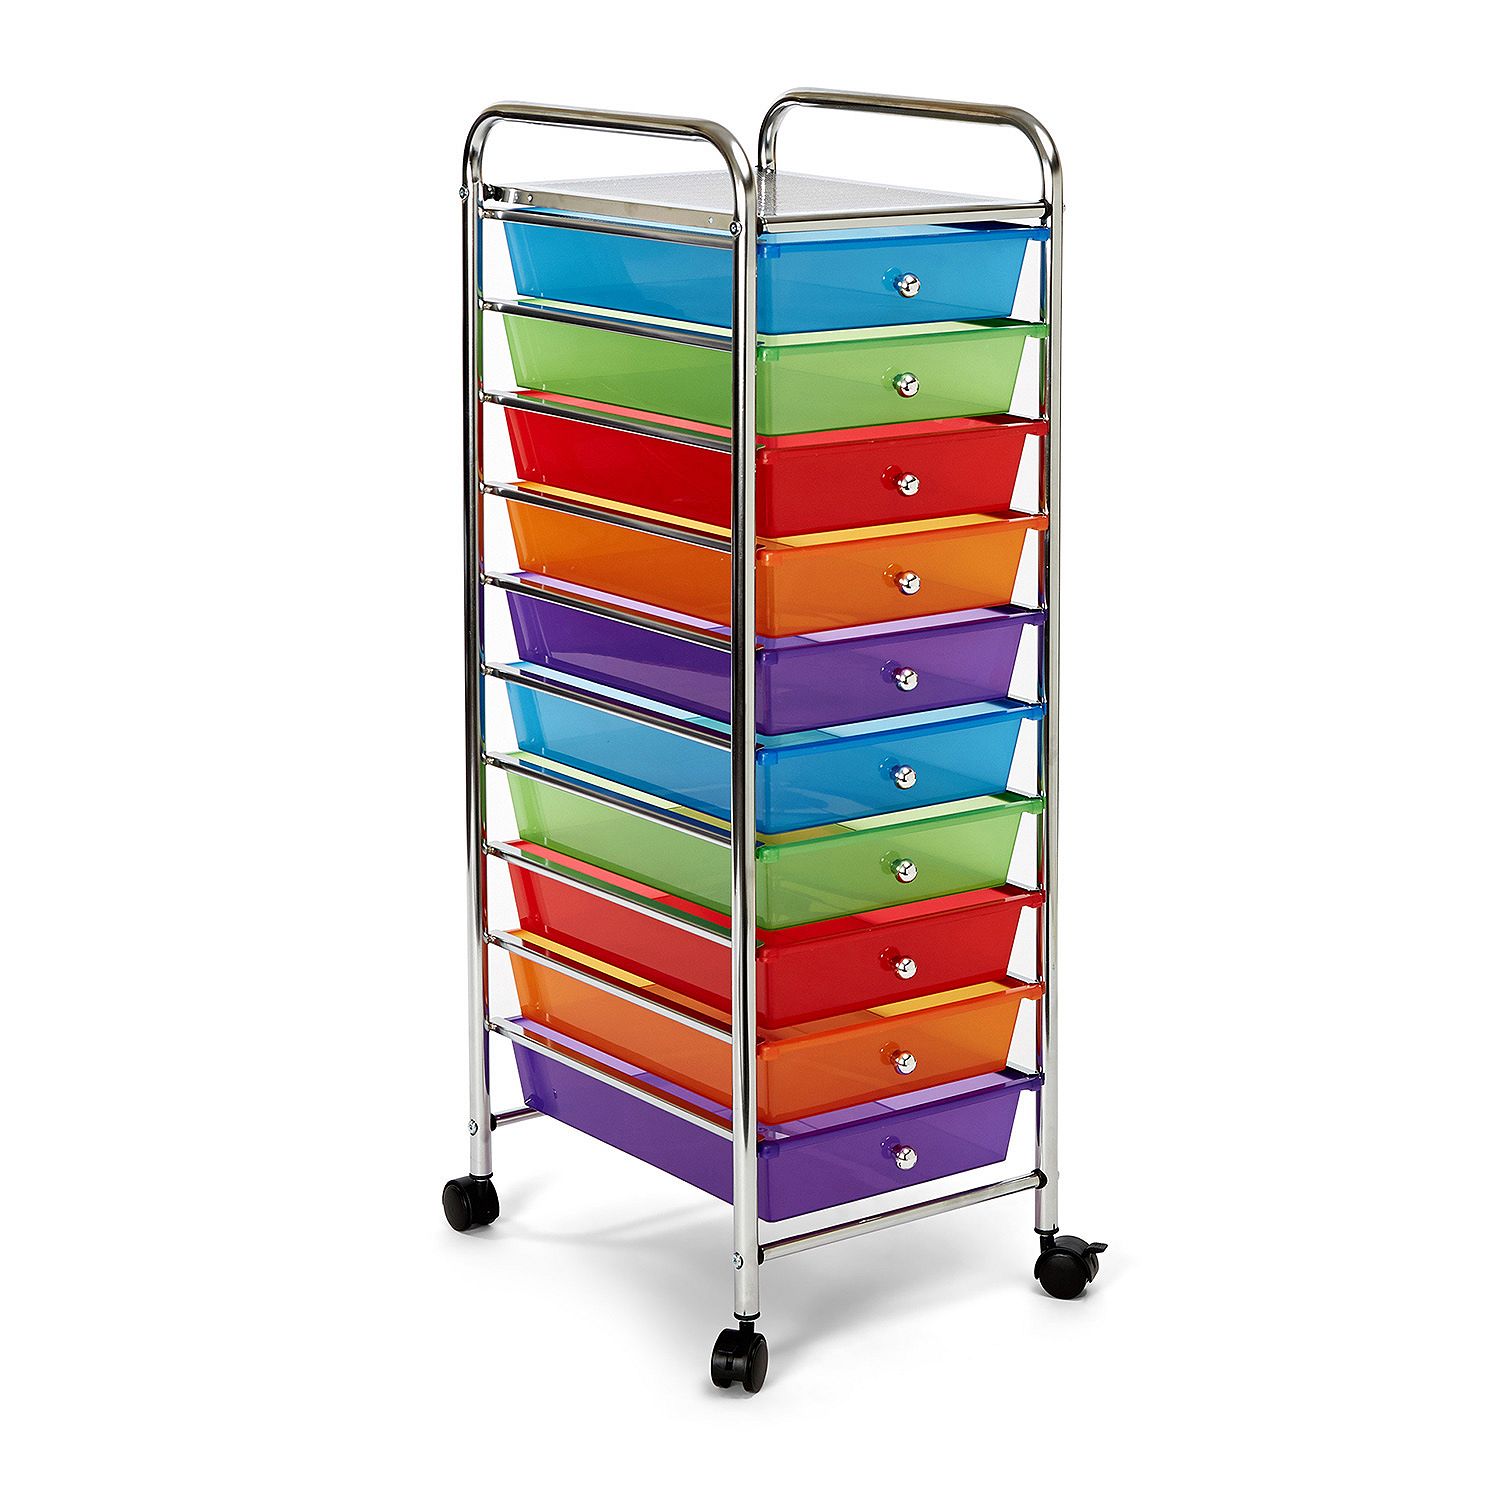 Seville 10 Drawer Cart with Four Caster Wheels